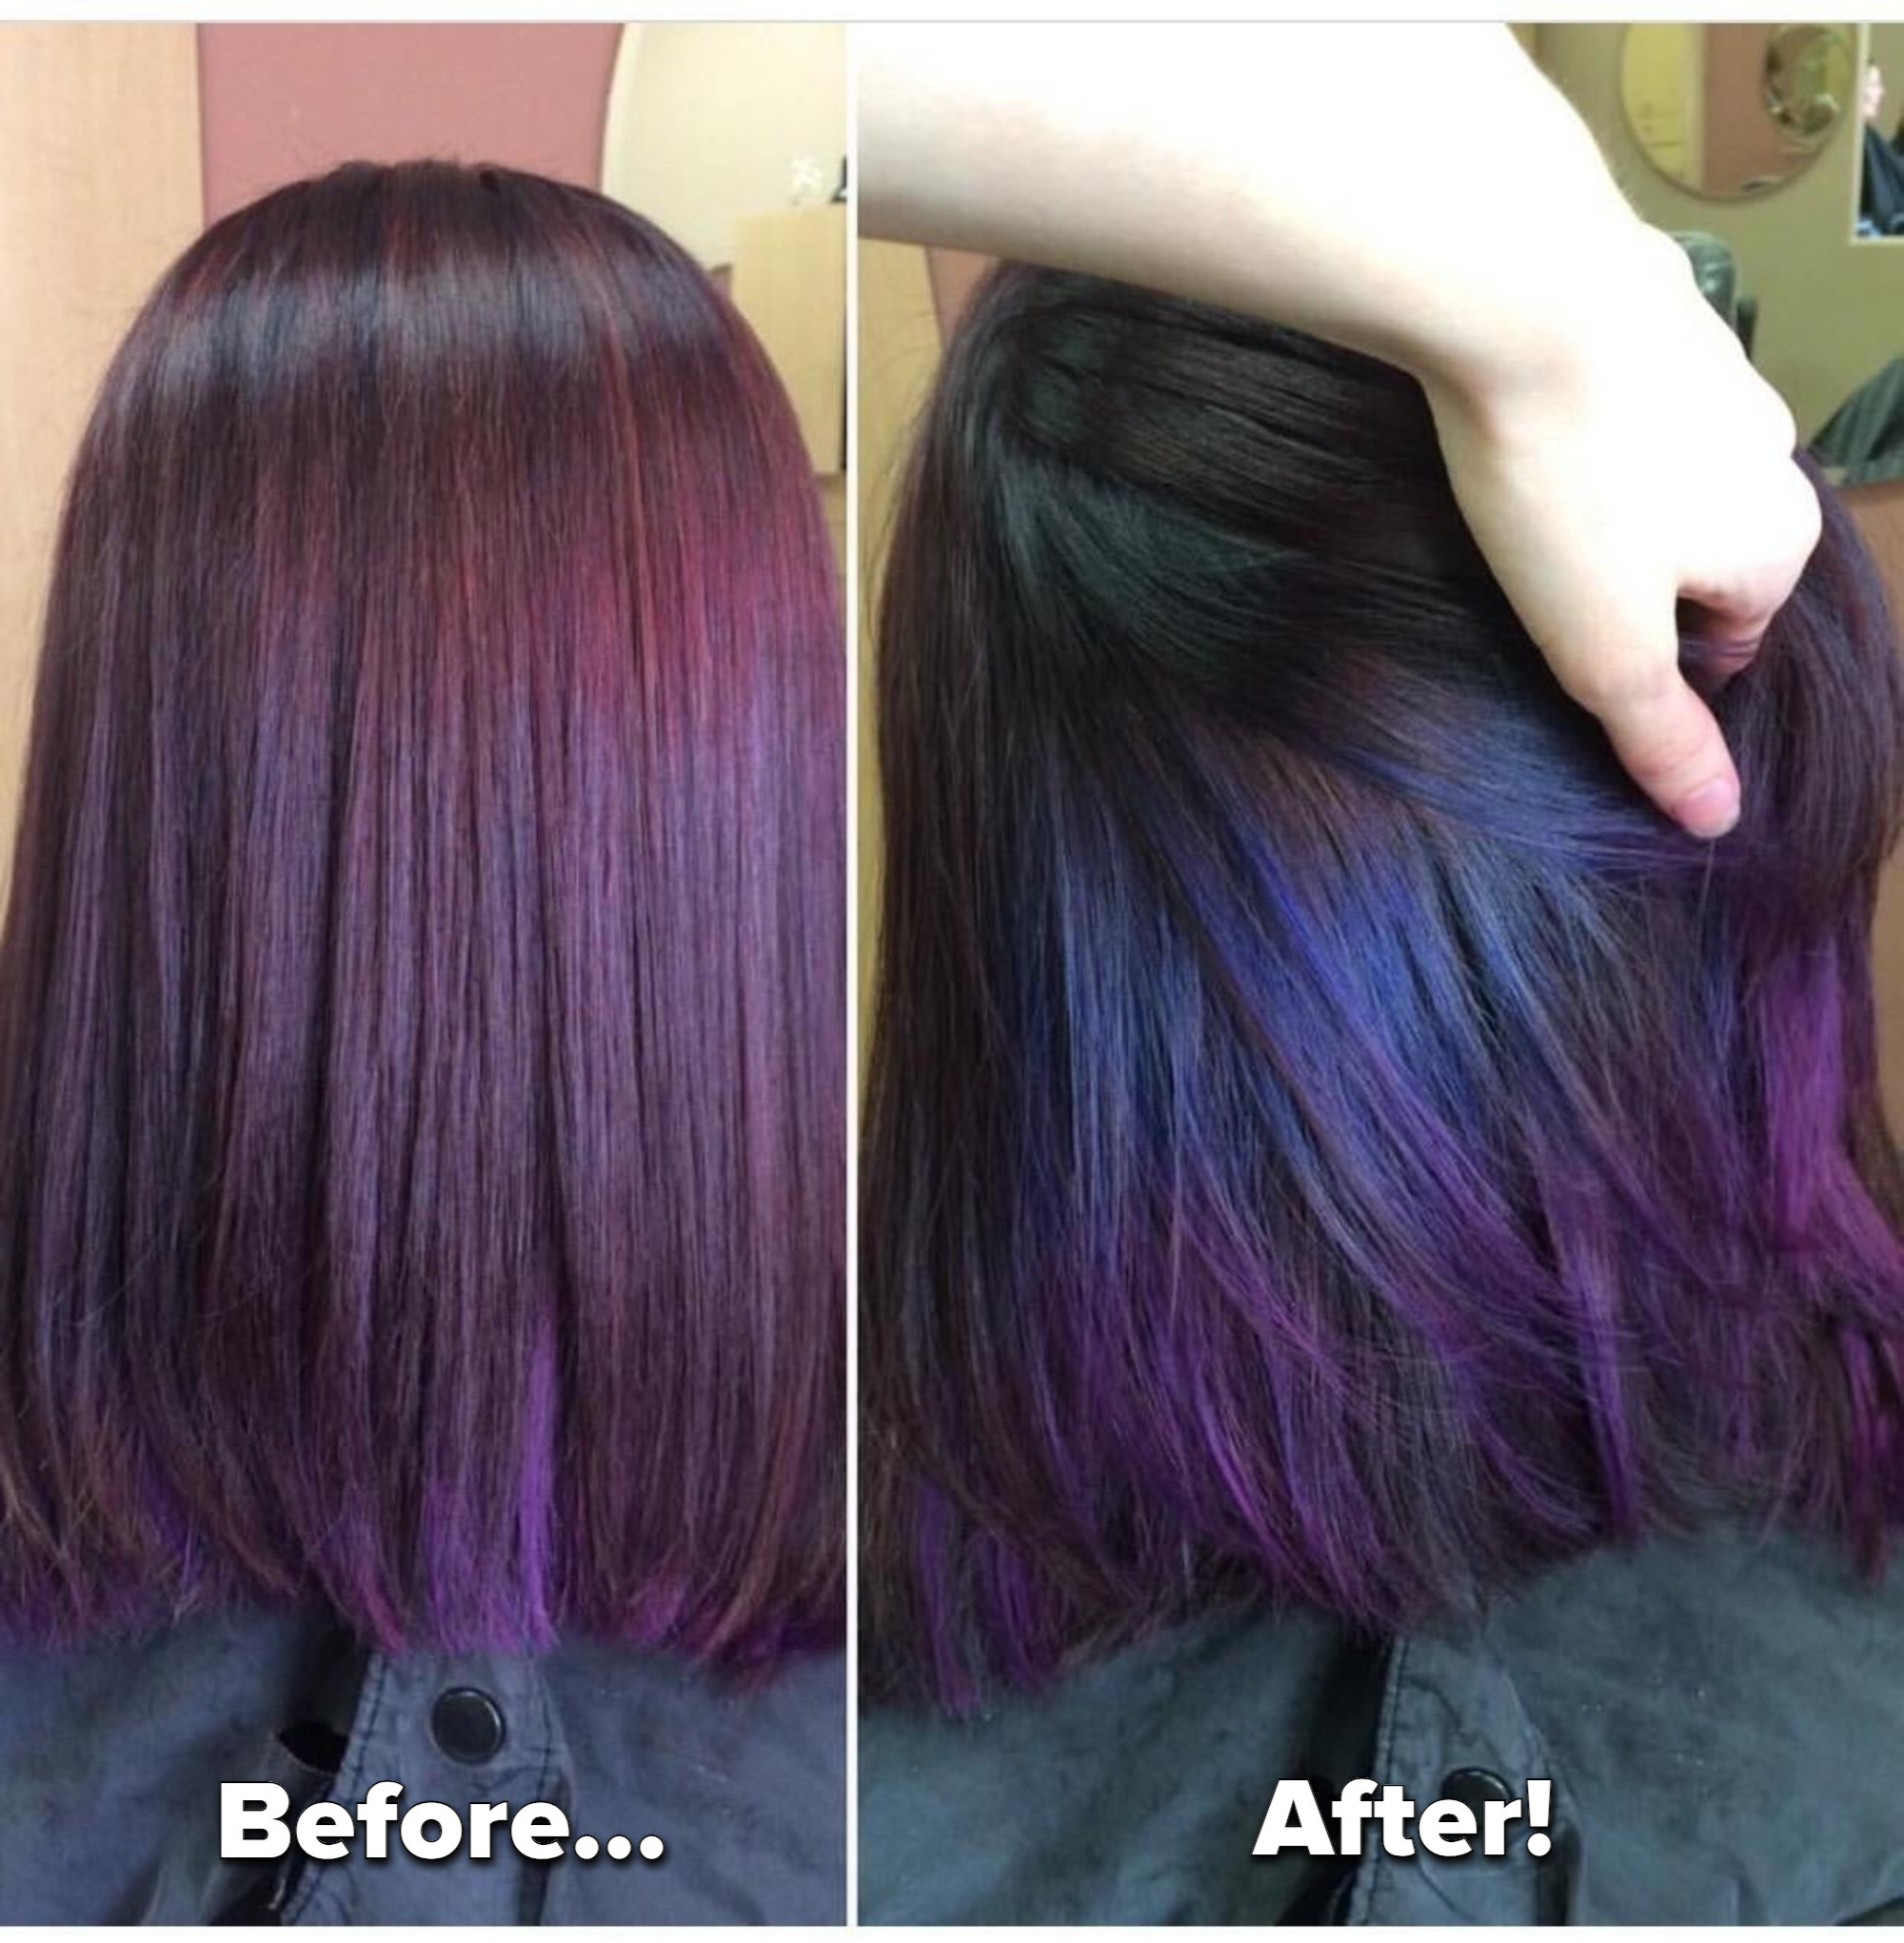 reviewer before and after photo showing how after using the hair treatment, their dyed hair has more shine and looks more hydrated